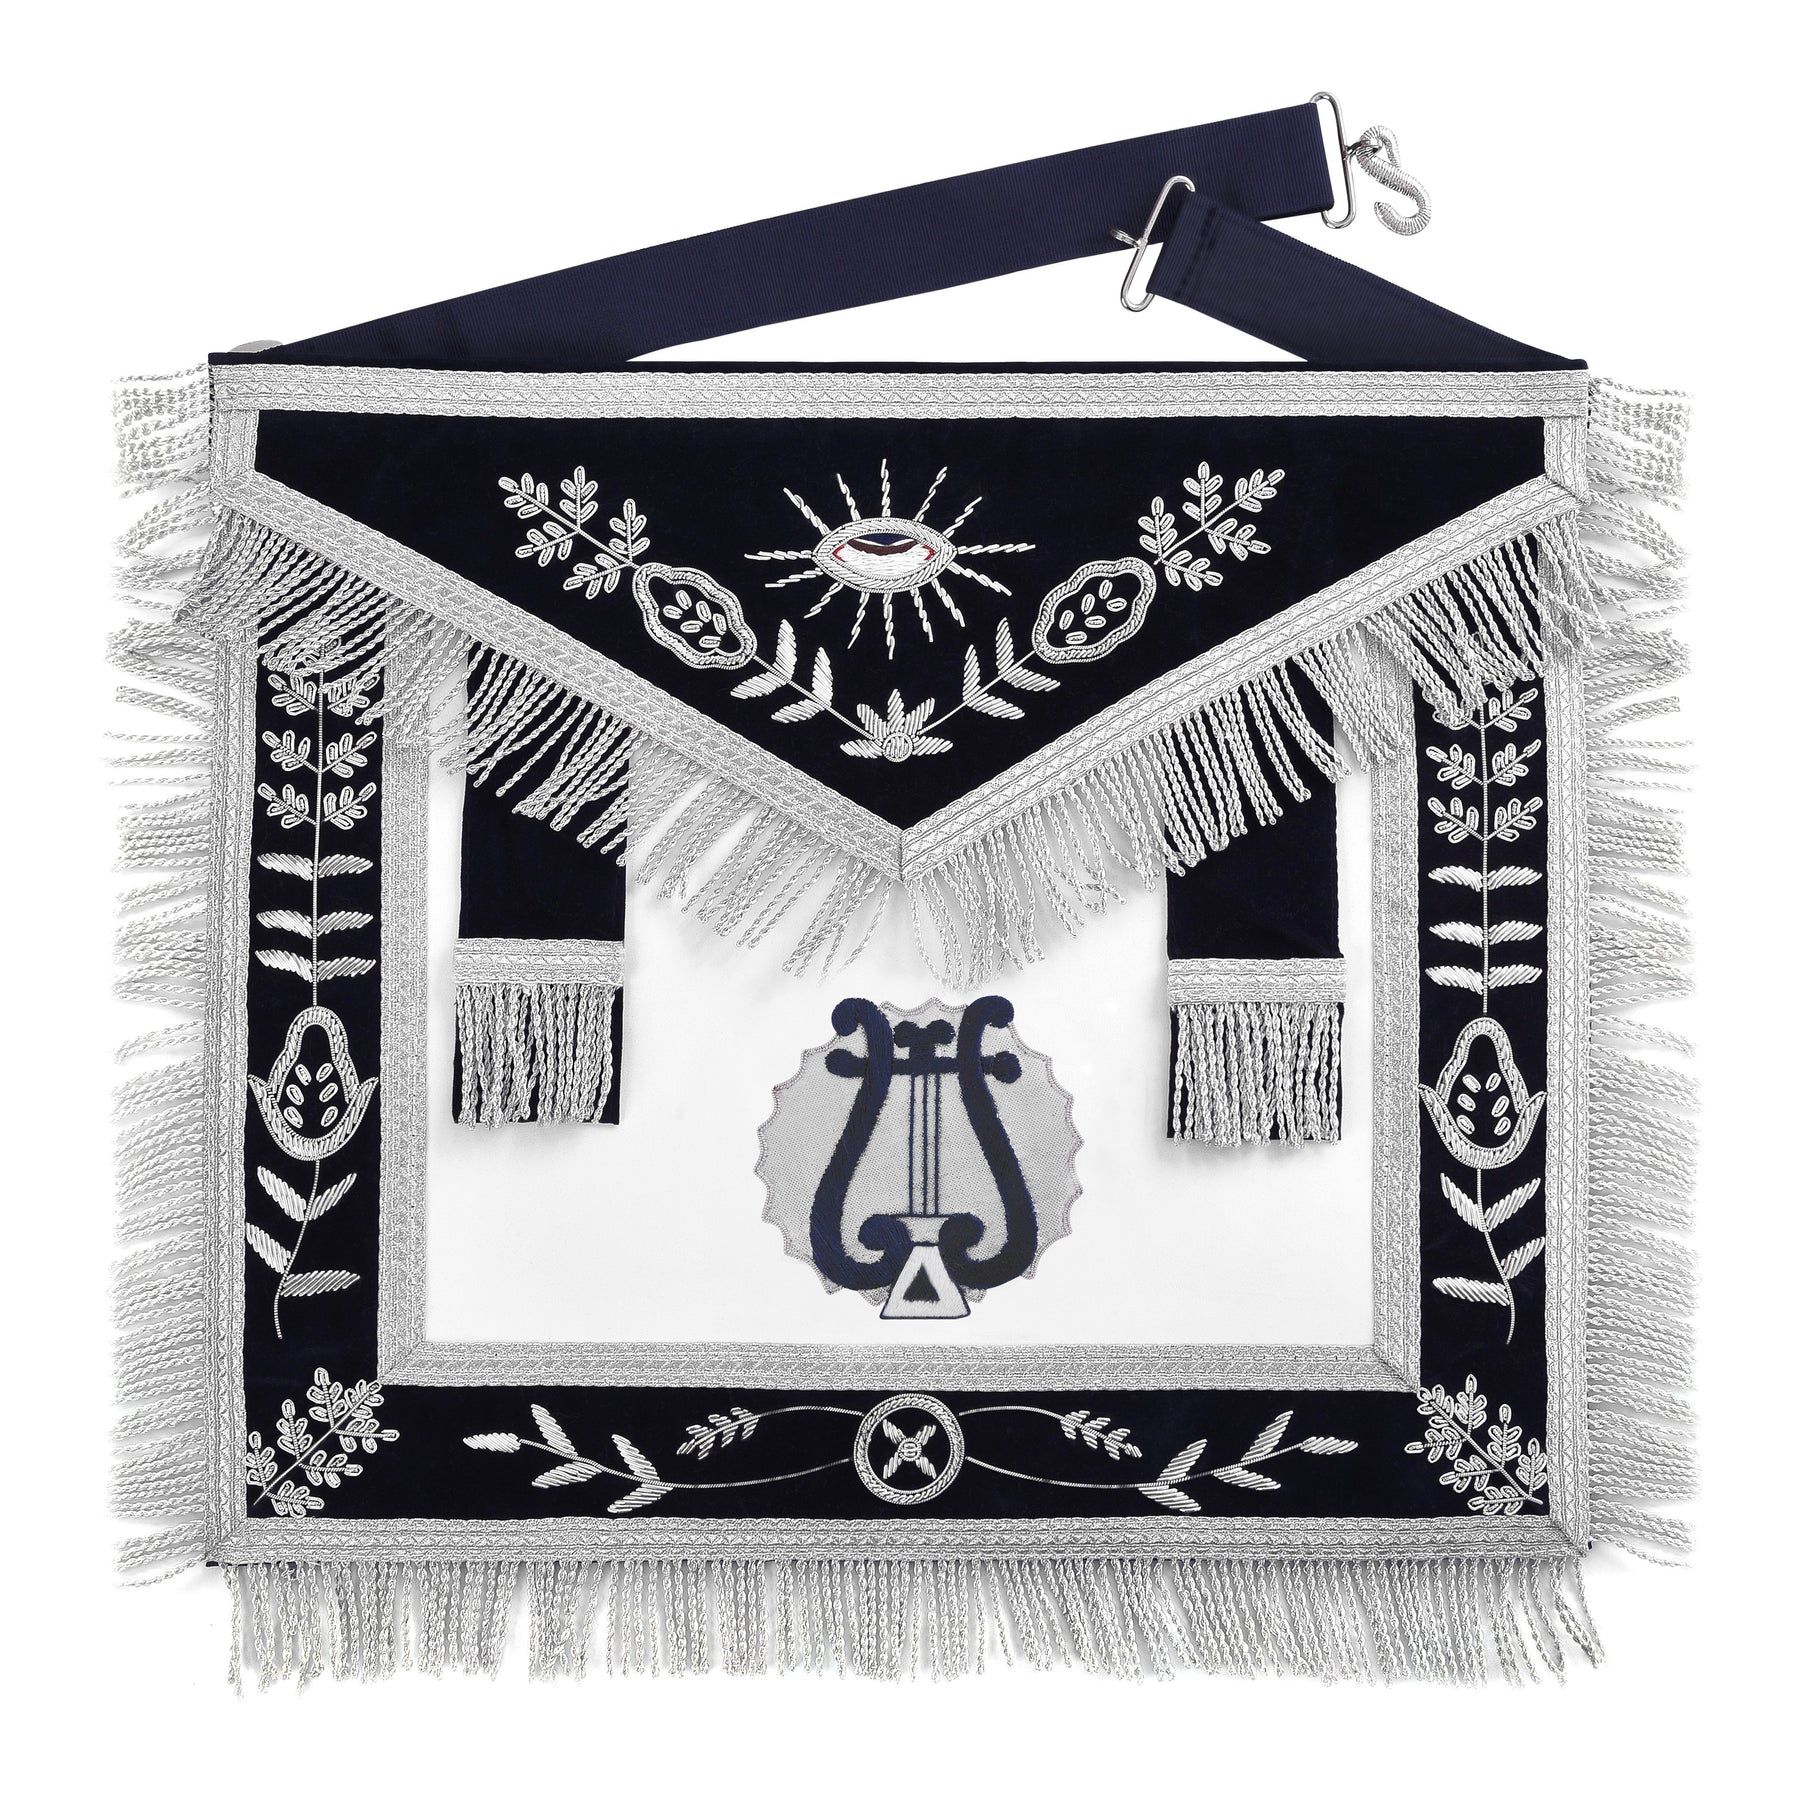 Organist Blue Lodge Officer Apron - Dark Blue With Silver Hand Embroidery Bullion